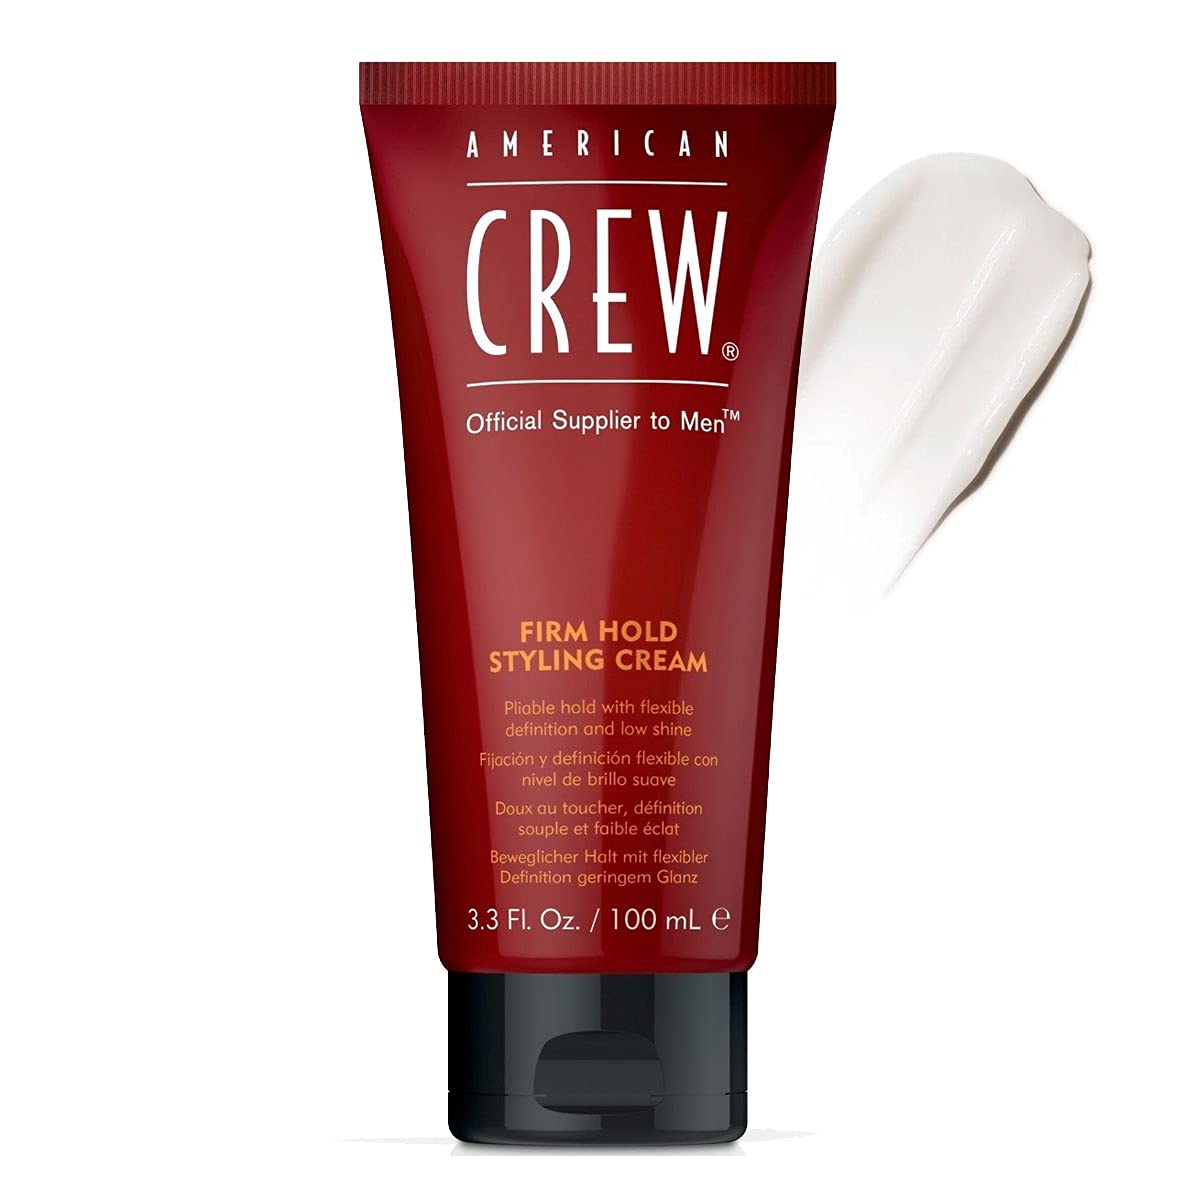 Men's Hair Styling Cream by American Crew, Like Hair Gel with Firm Hold with Low Shine, 3.3 Fl Oz